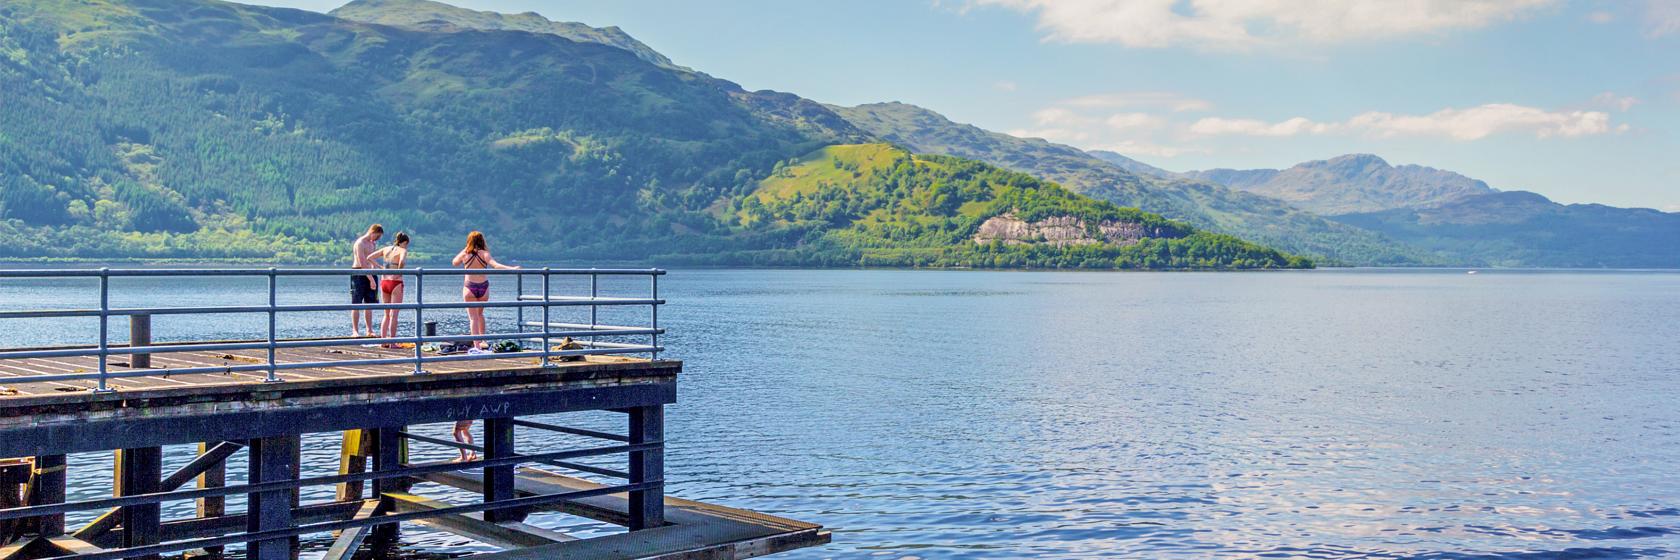 Places to Stay in magical Scotland